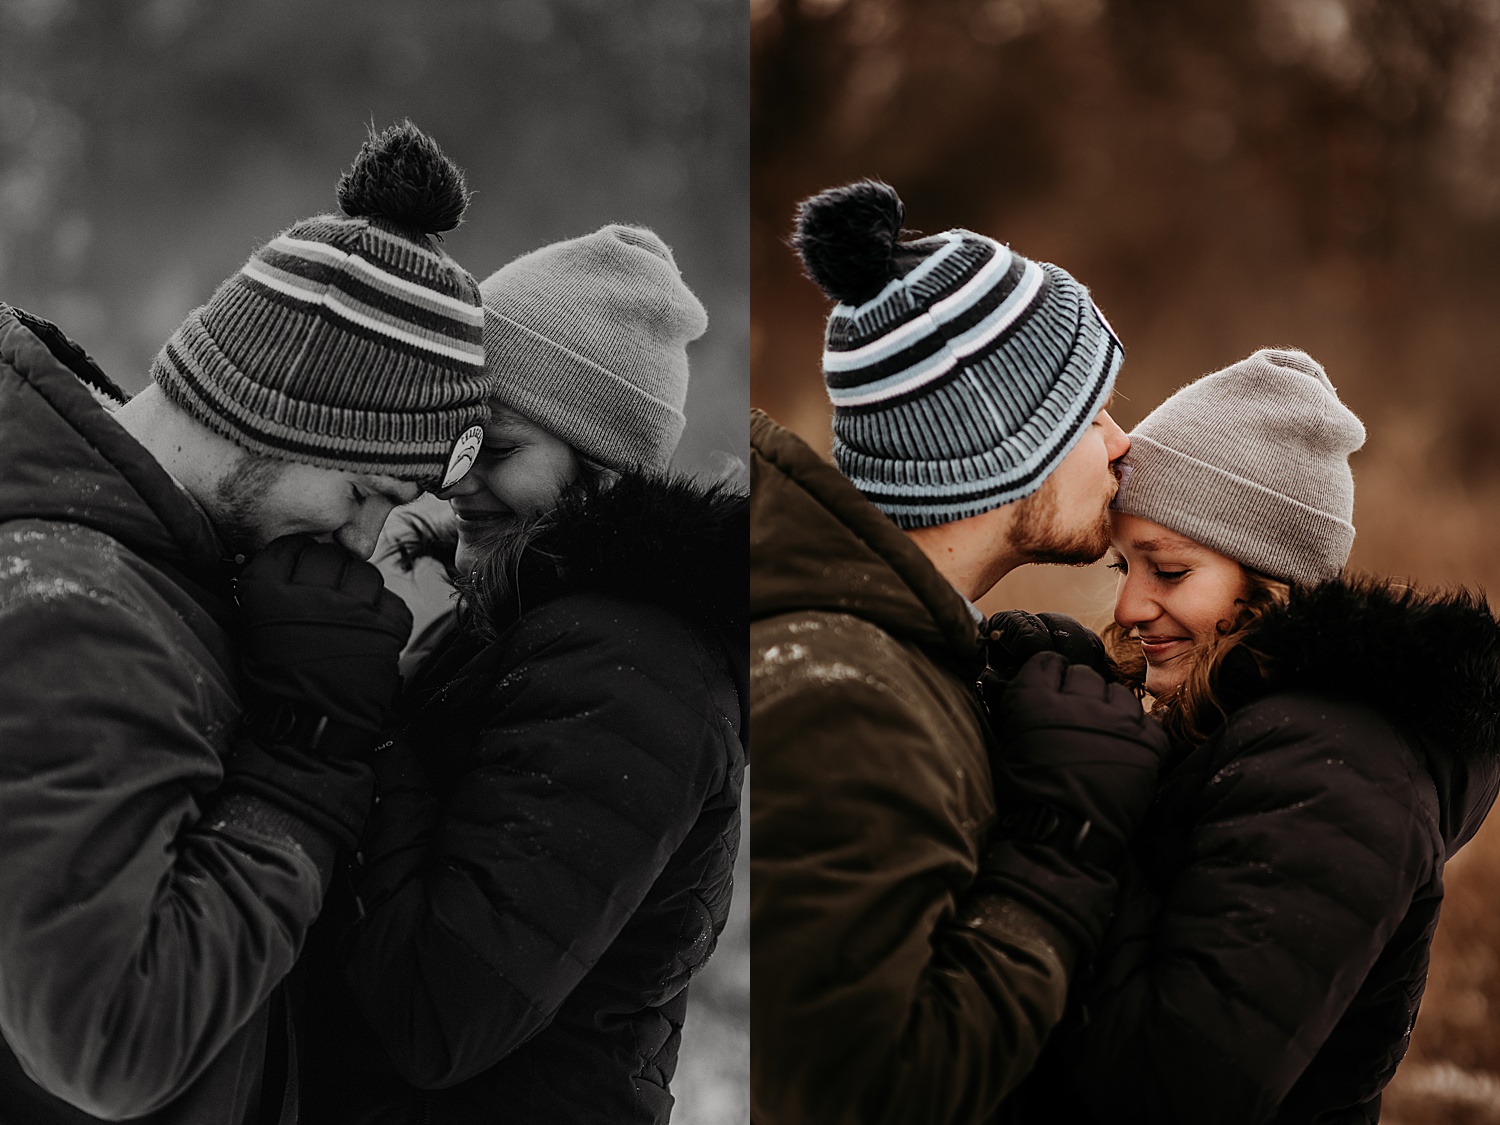 Engaged man gives forehead kisses to fiancé during snowy engagement session